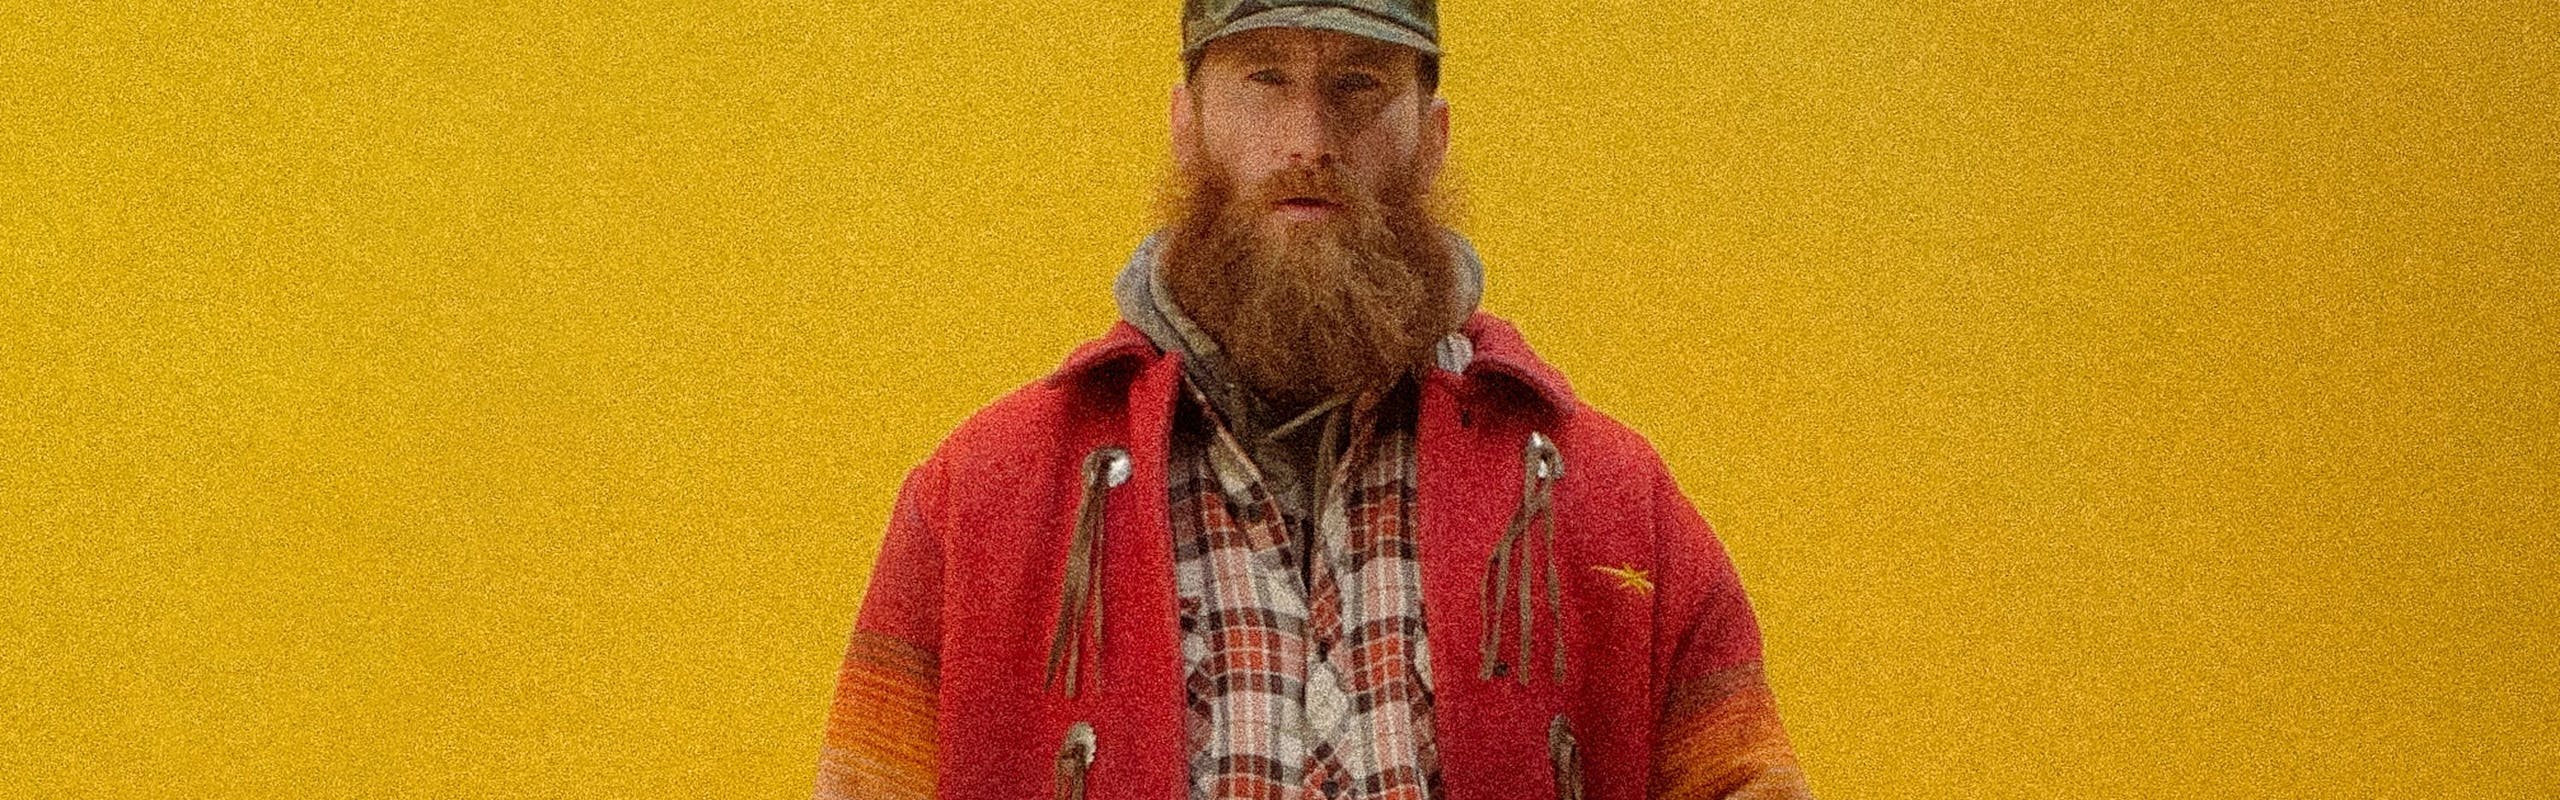 PHIPPS Gold Label Vintage per Woolrich (Courtesy of Woolrich)